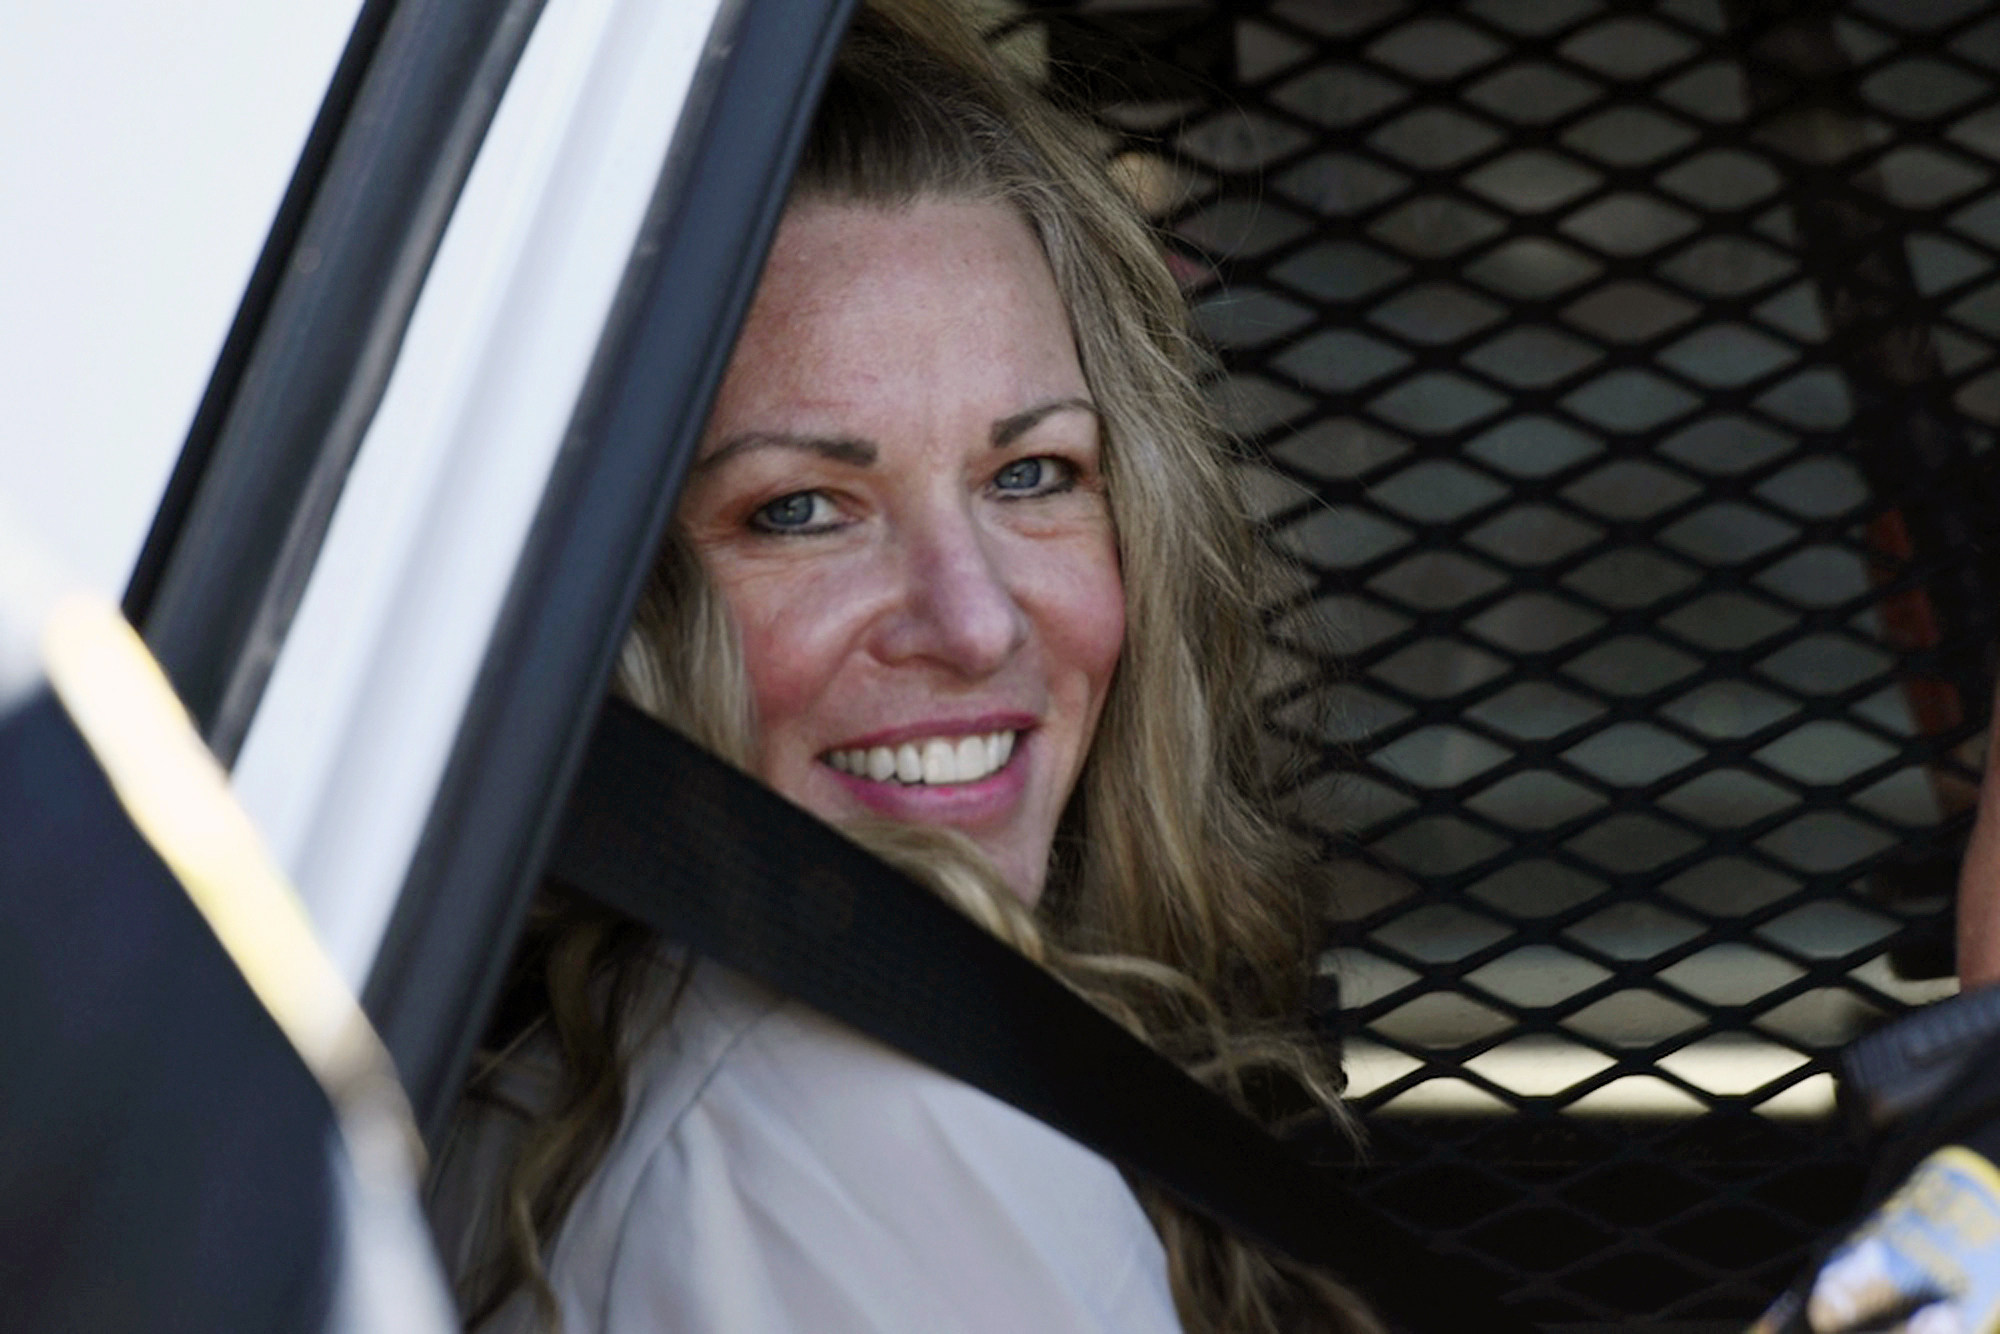 Lori Vallow Daybell sits in a police car after a hearing at the Fremont County Courthouse in St Anthony, Idaho, in August 2022. Photo: East Idaho News via AP